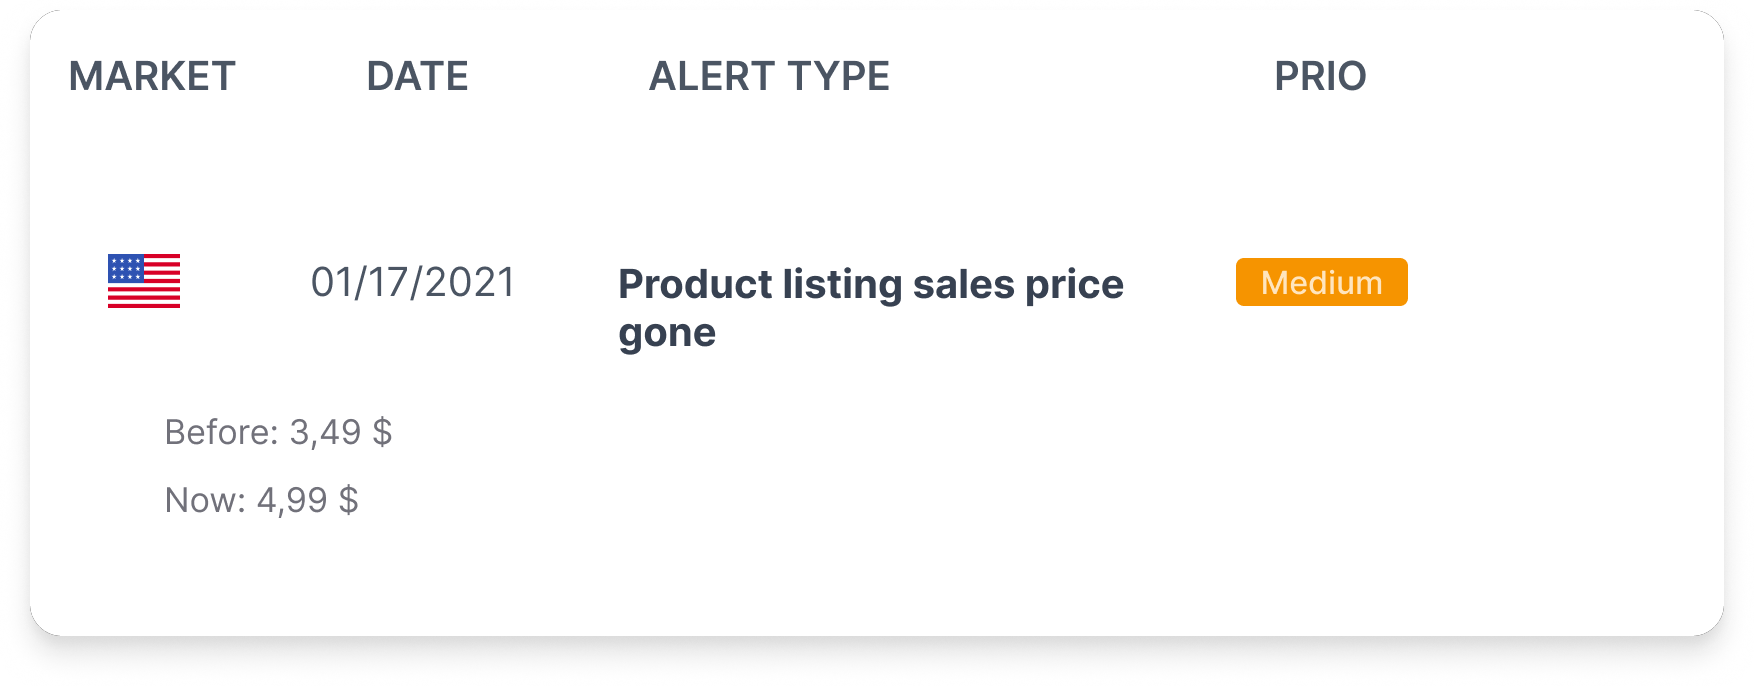 Amazon alert product listing sales price gone additional information